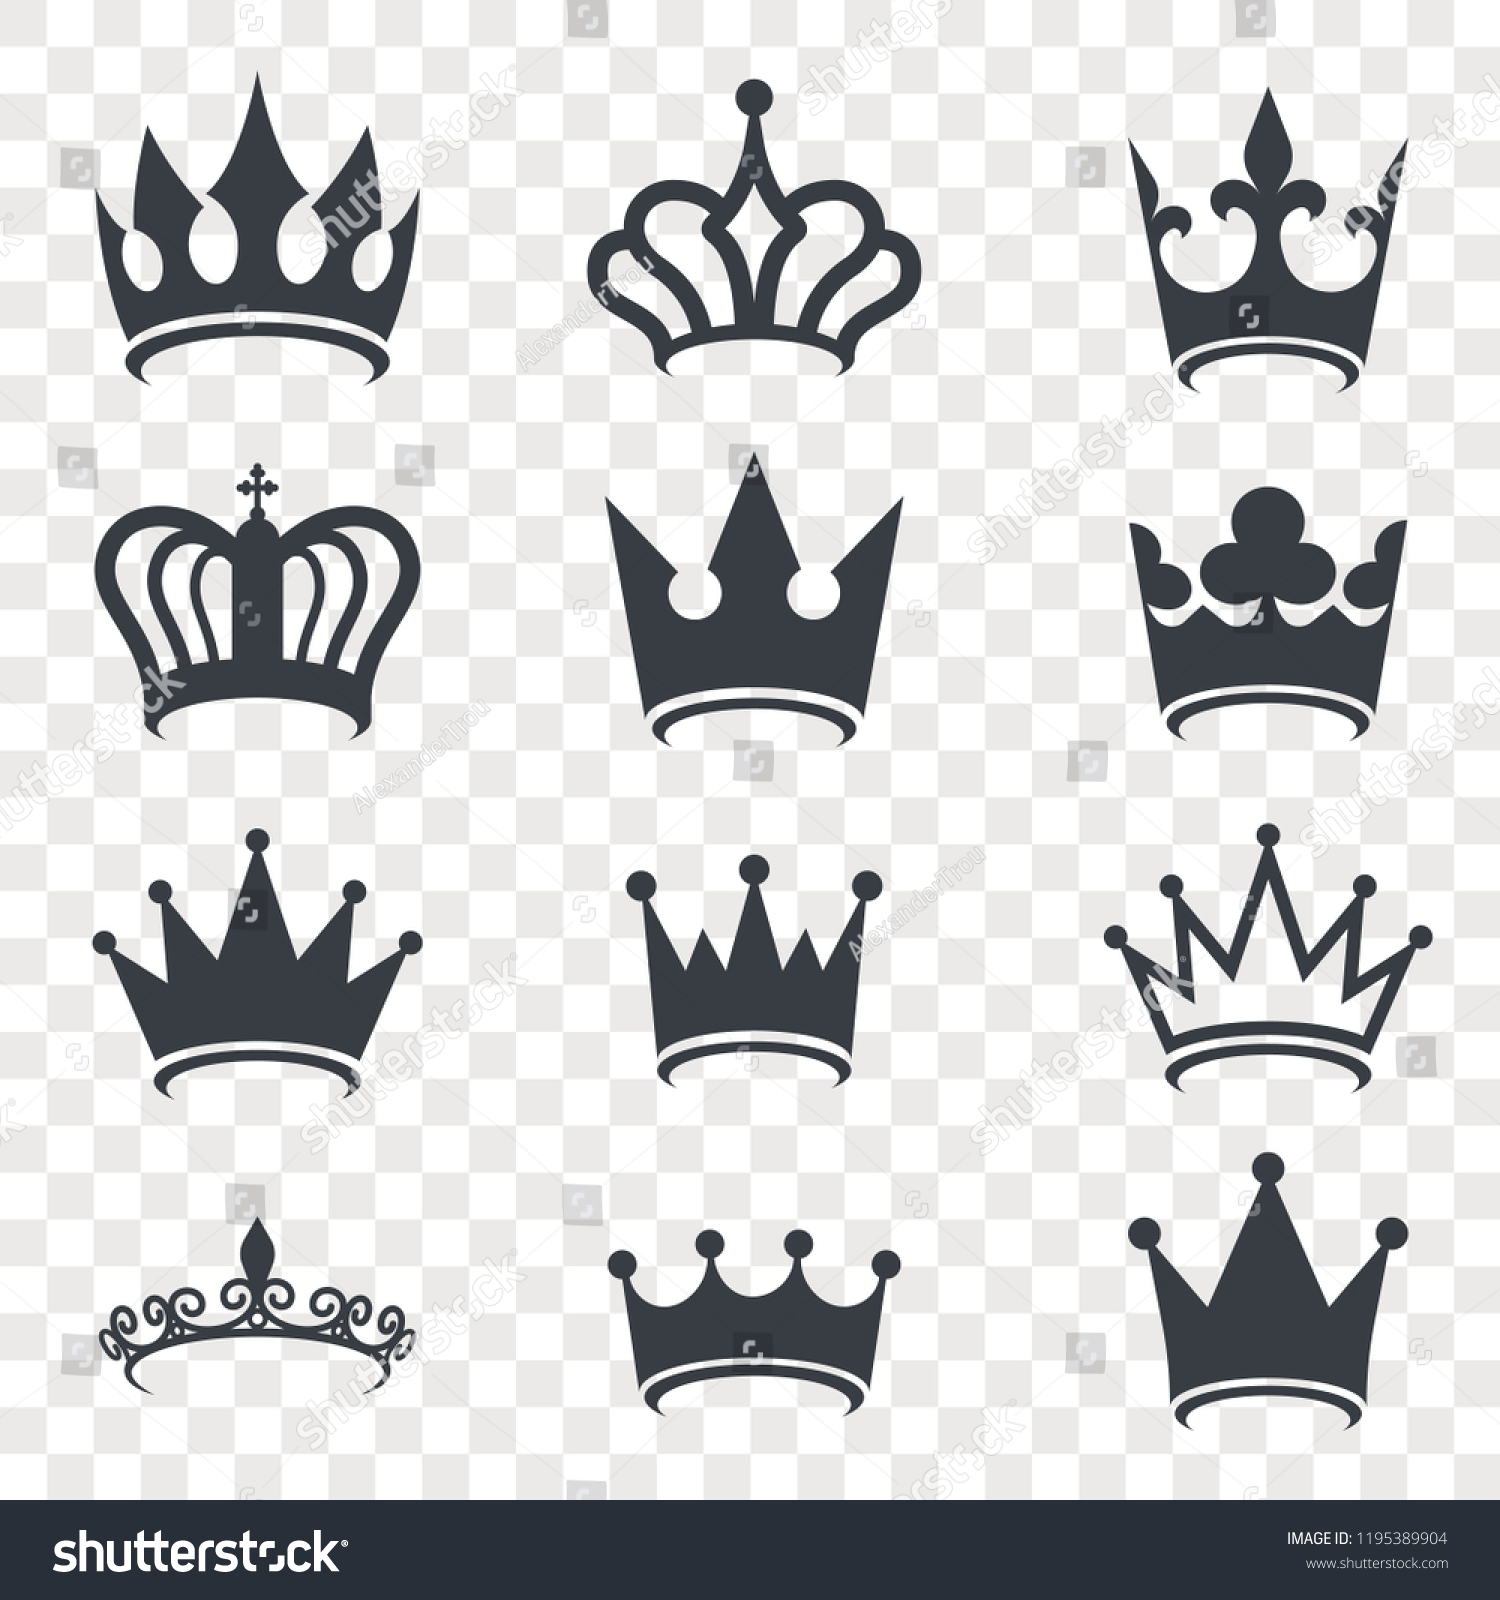 Detail Crown Silhouette Transparent Background Nomer 48